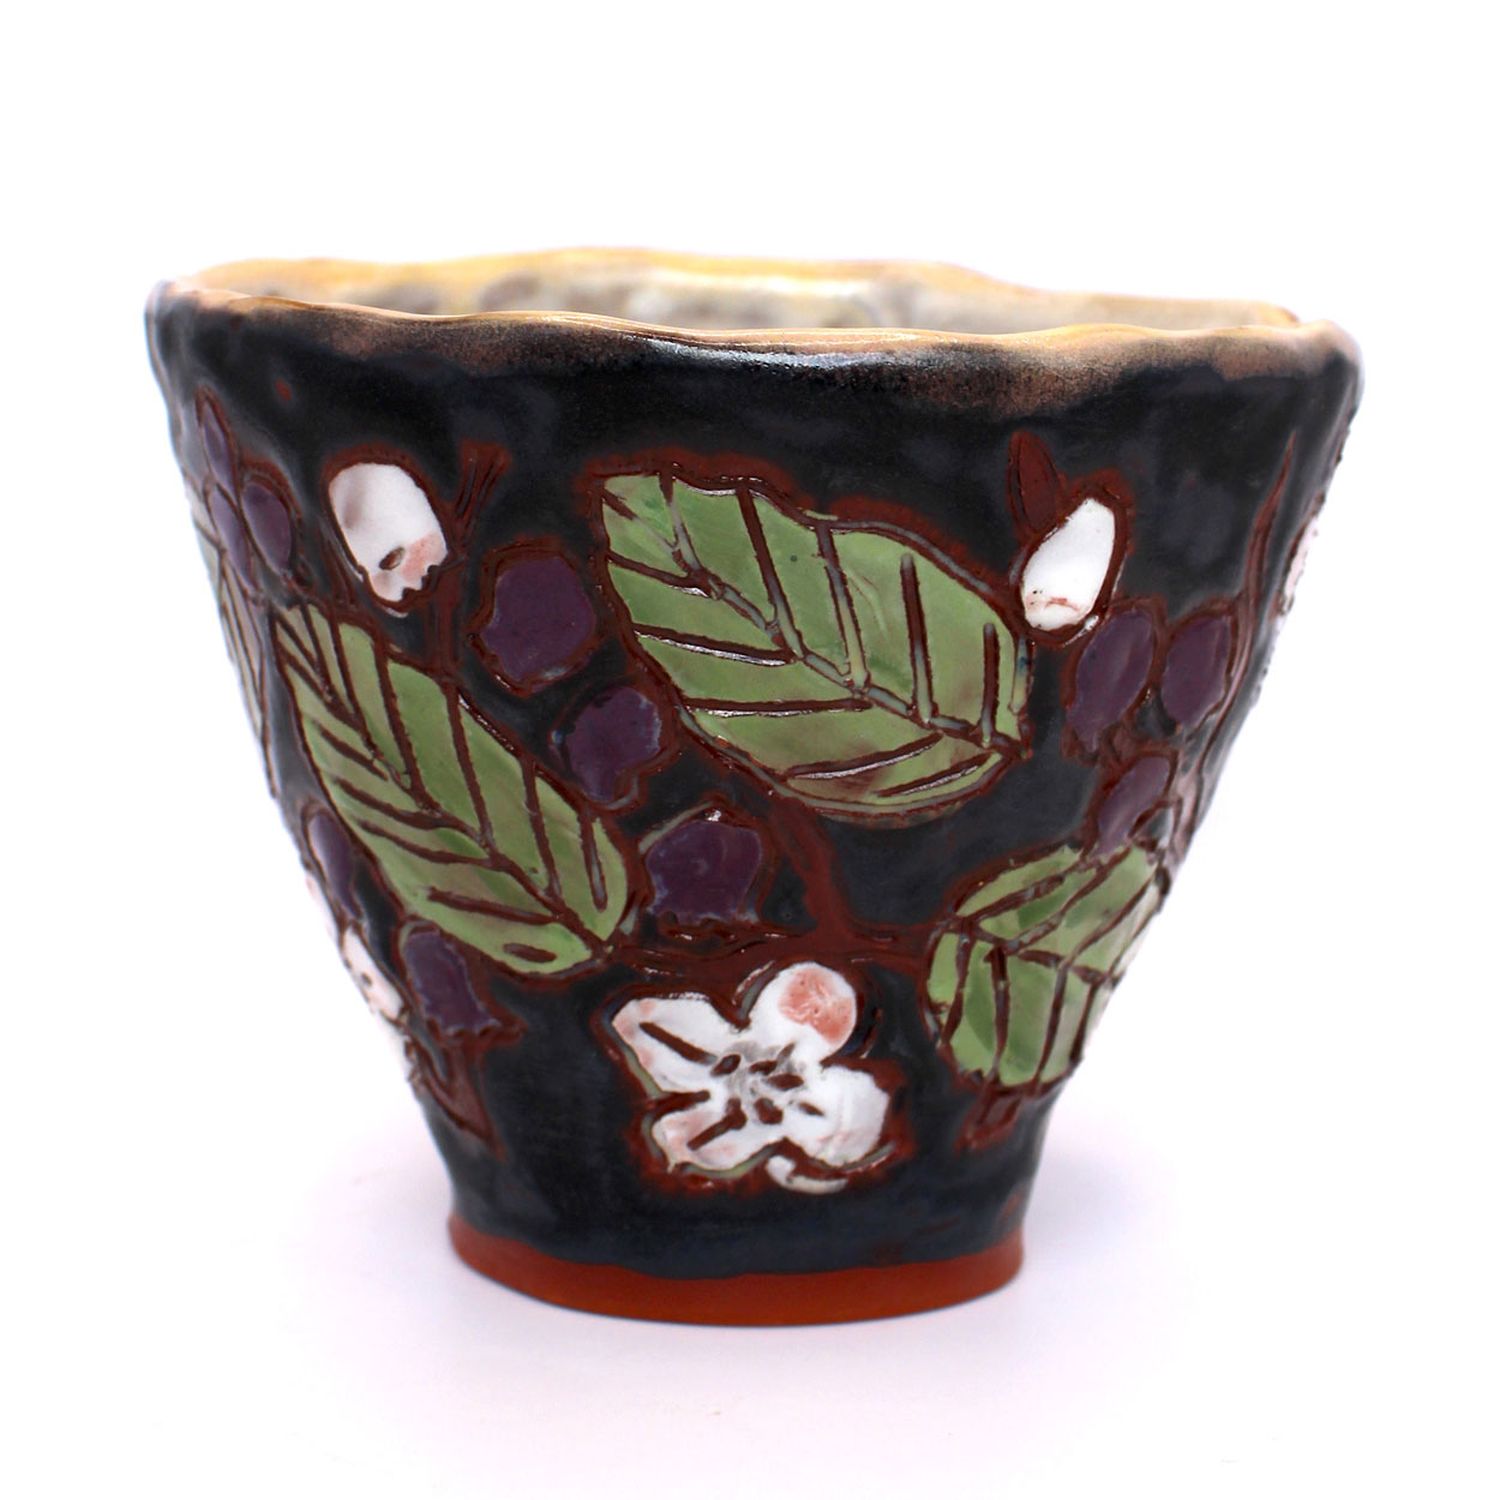 Zoe Pinnell: Blueberry Cup Product Image 1 of 2